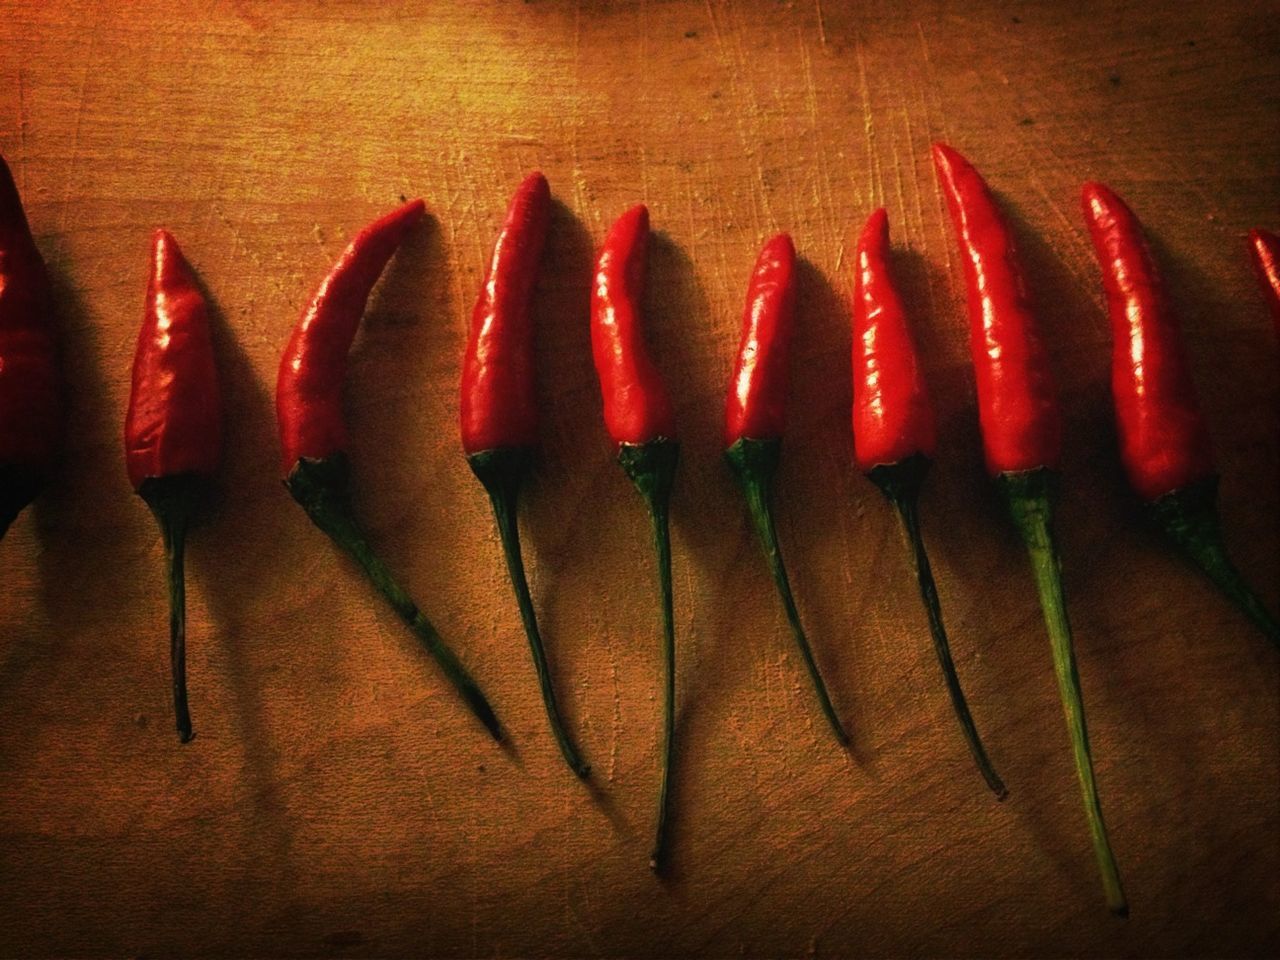 Close-up of red chilies on wooden table